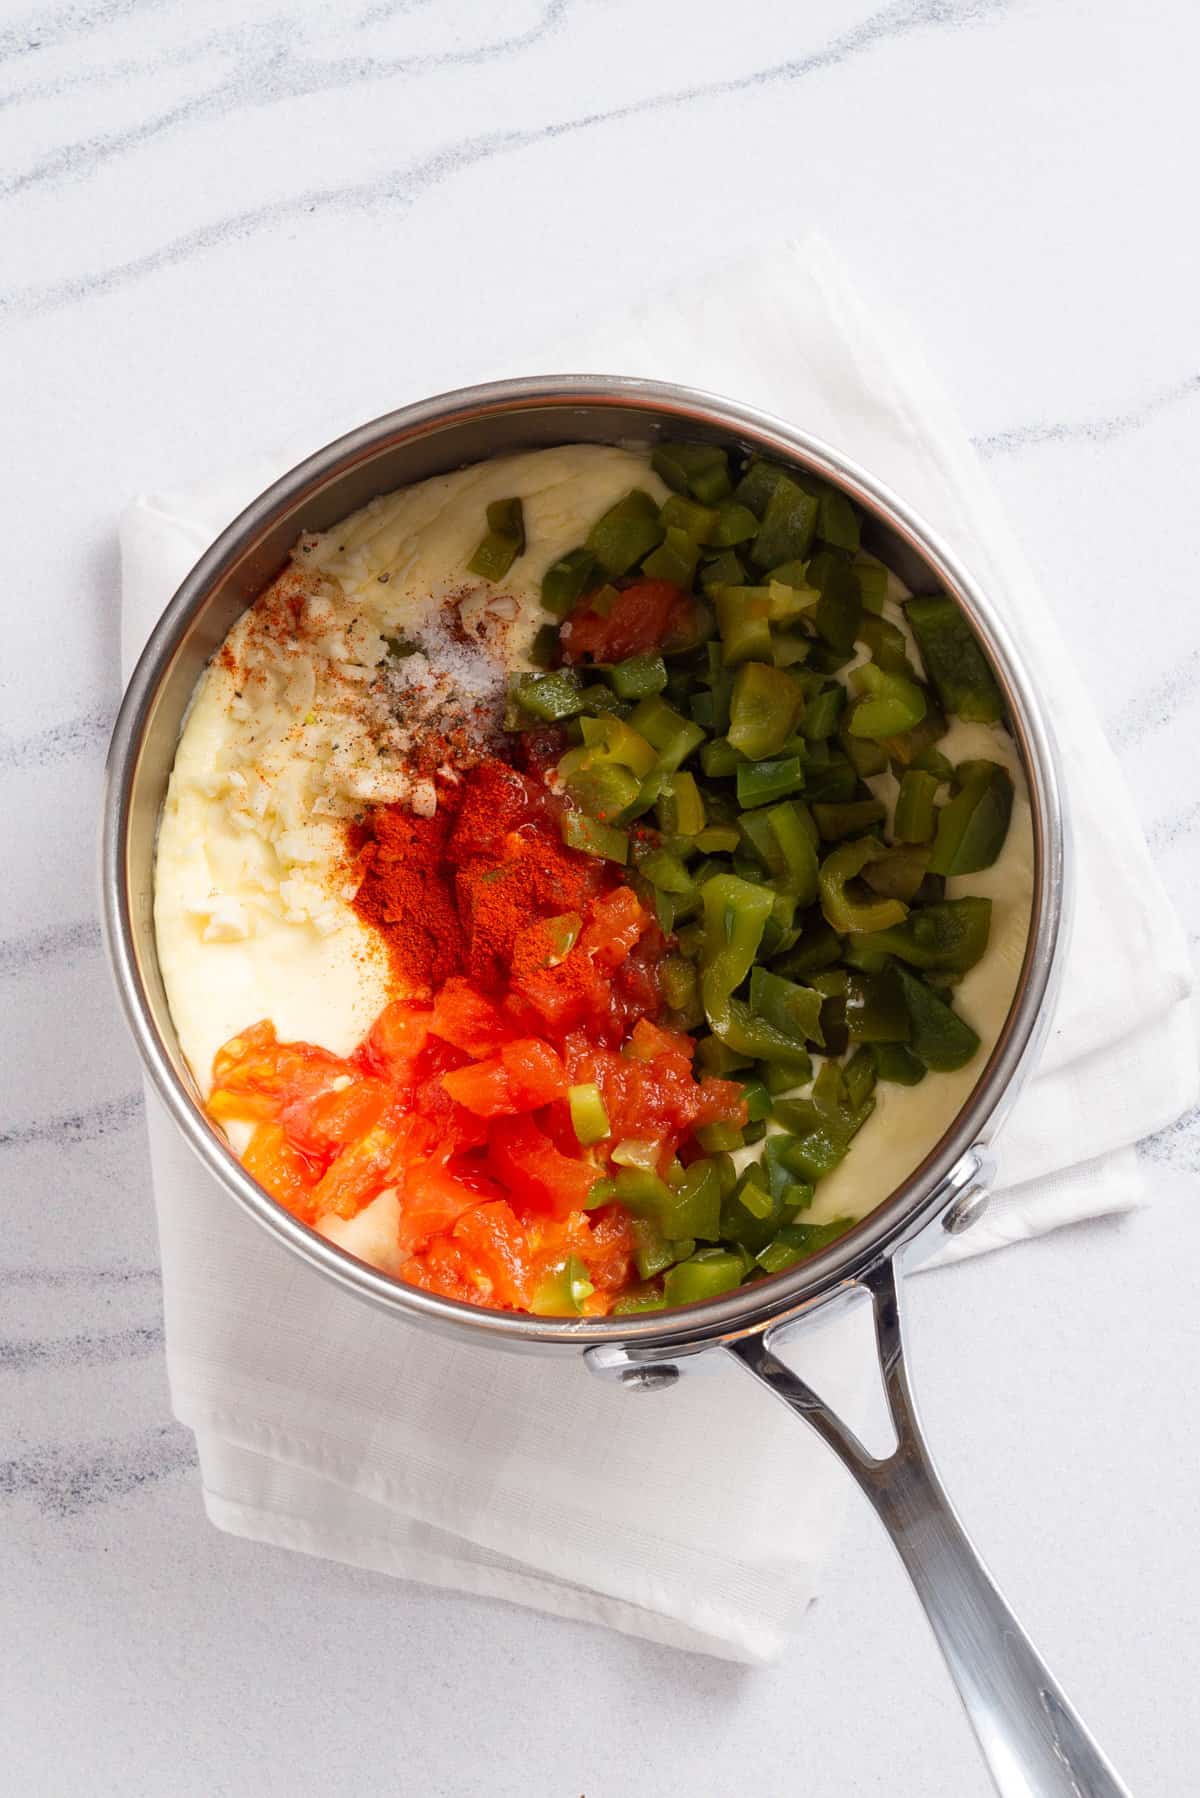 An image of 3-cheese dip combined with spices and roasted veggies in a saucepan.